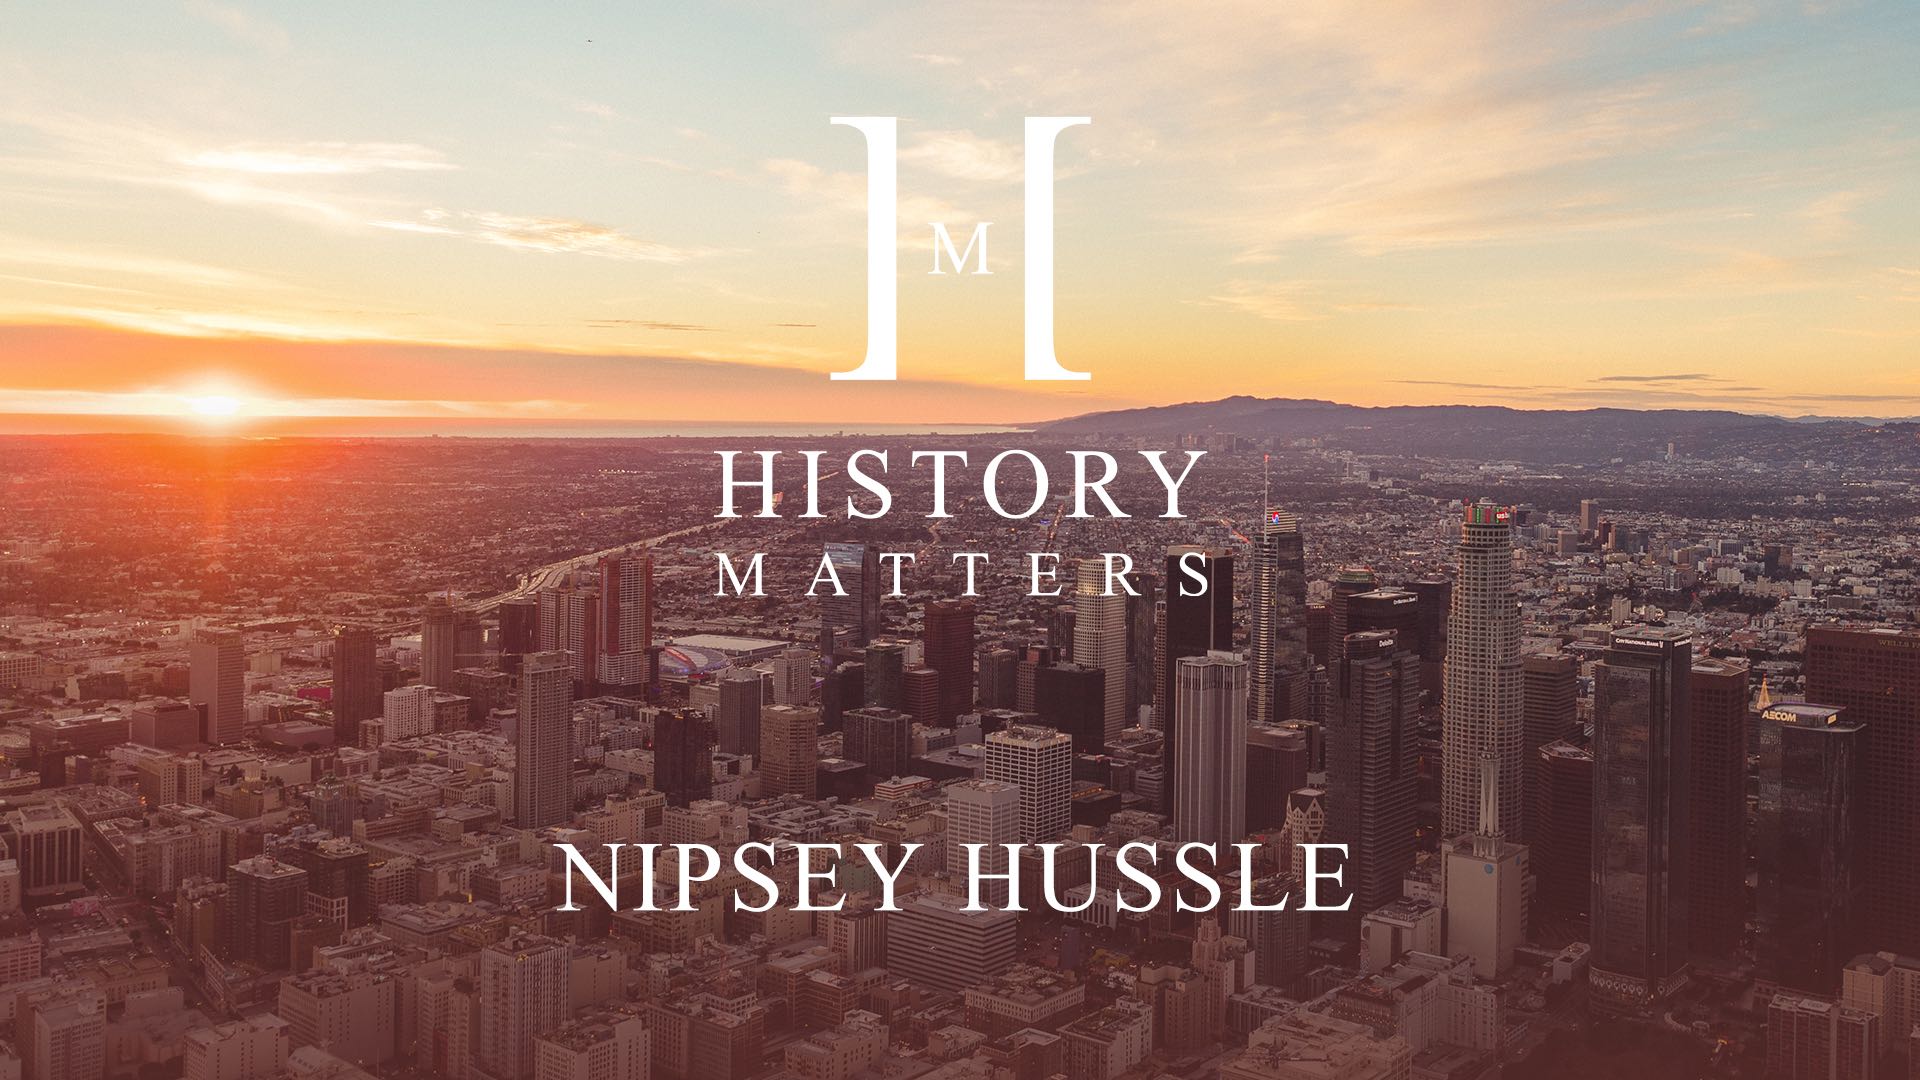 White HM Nipsey Hussle logo with a background of aerial view of a city at sunrise